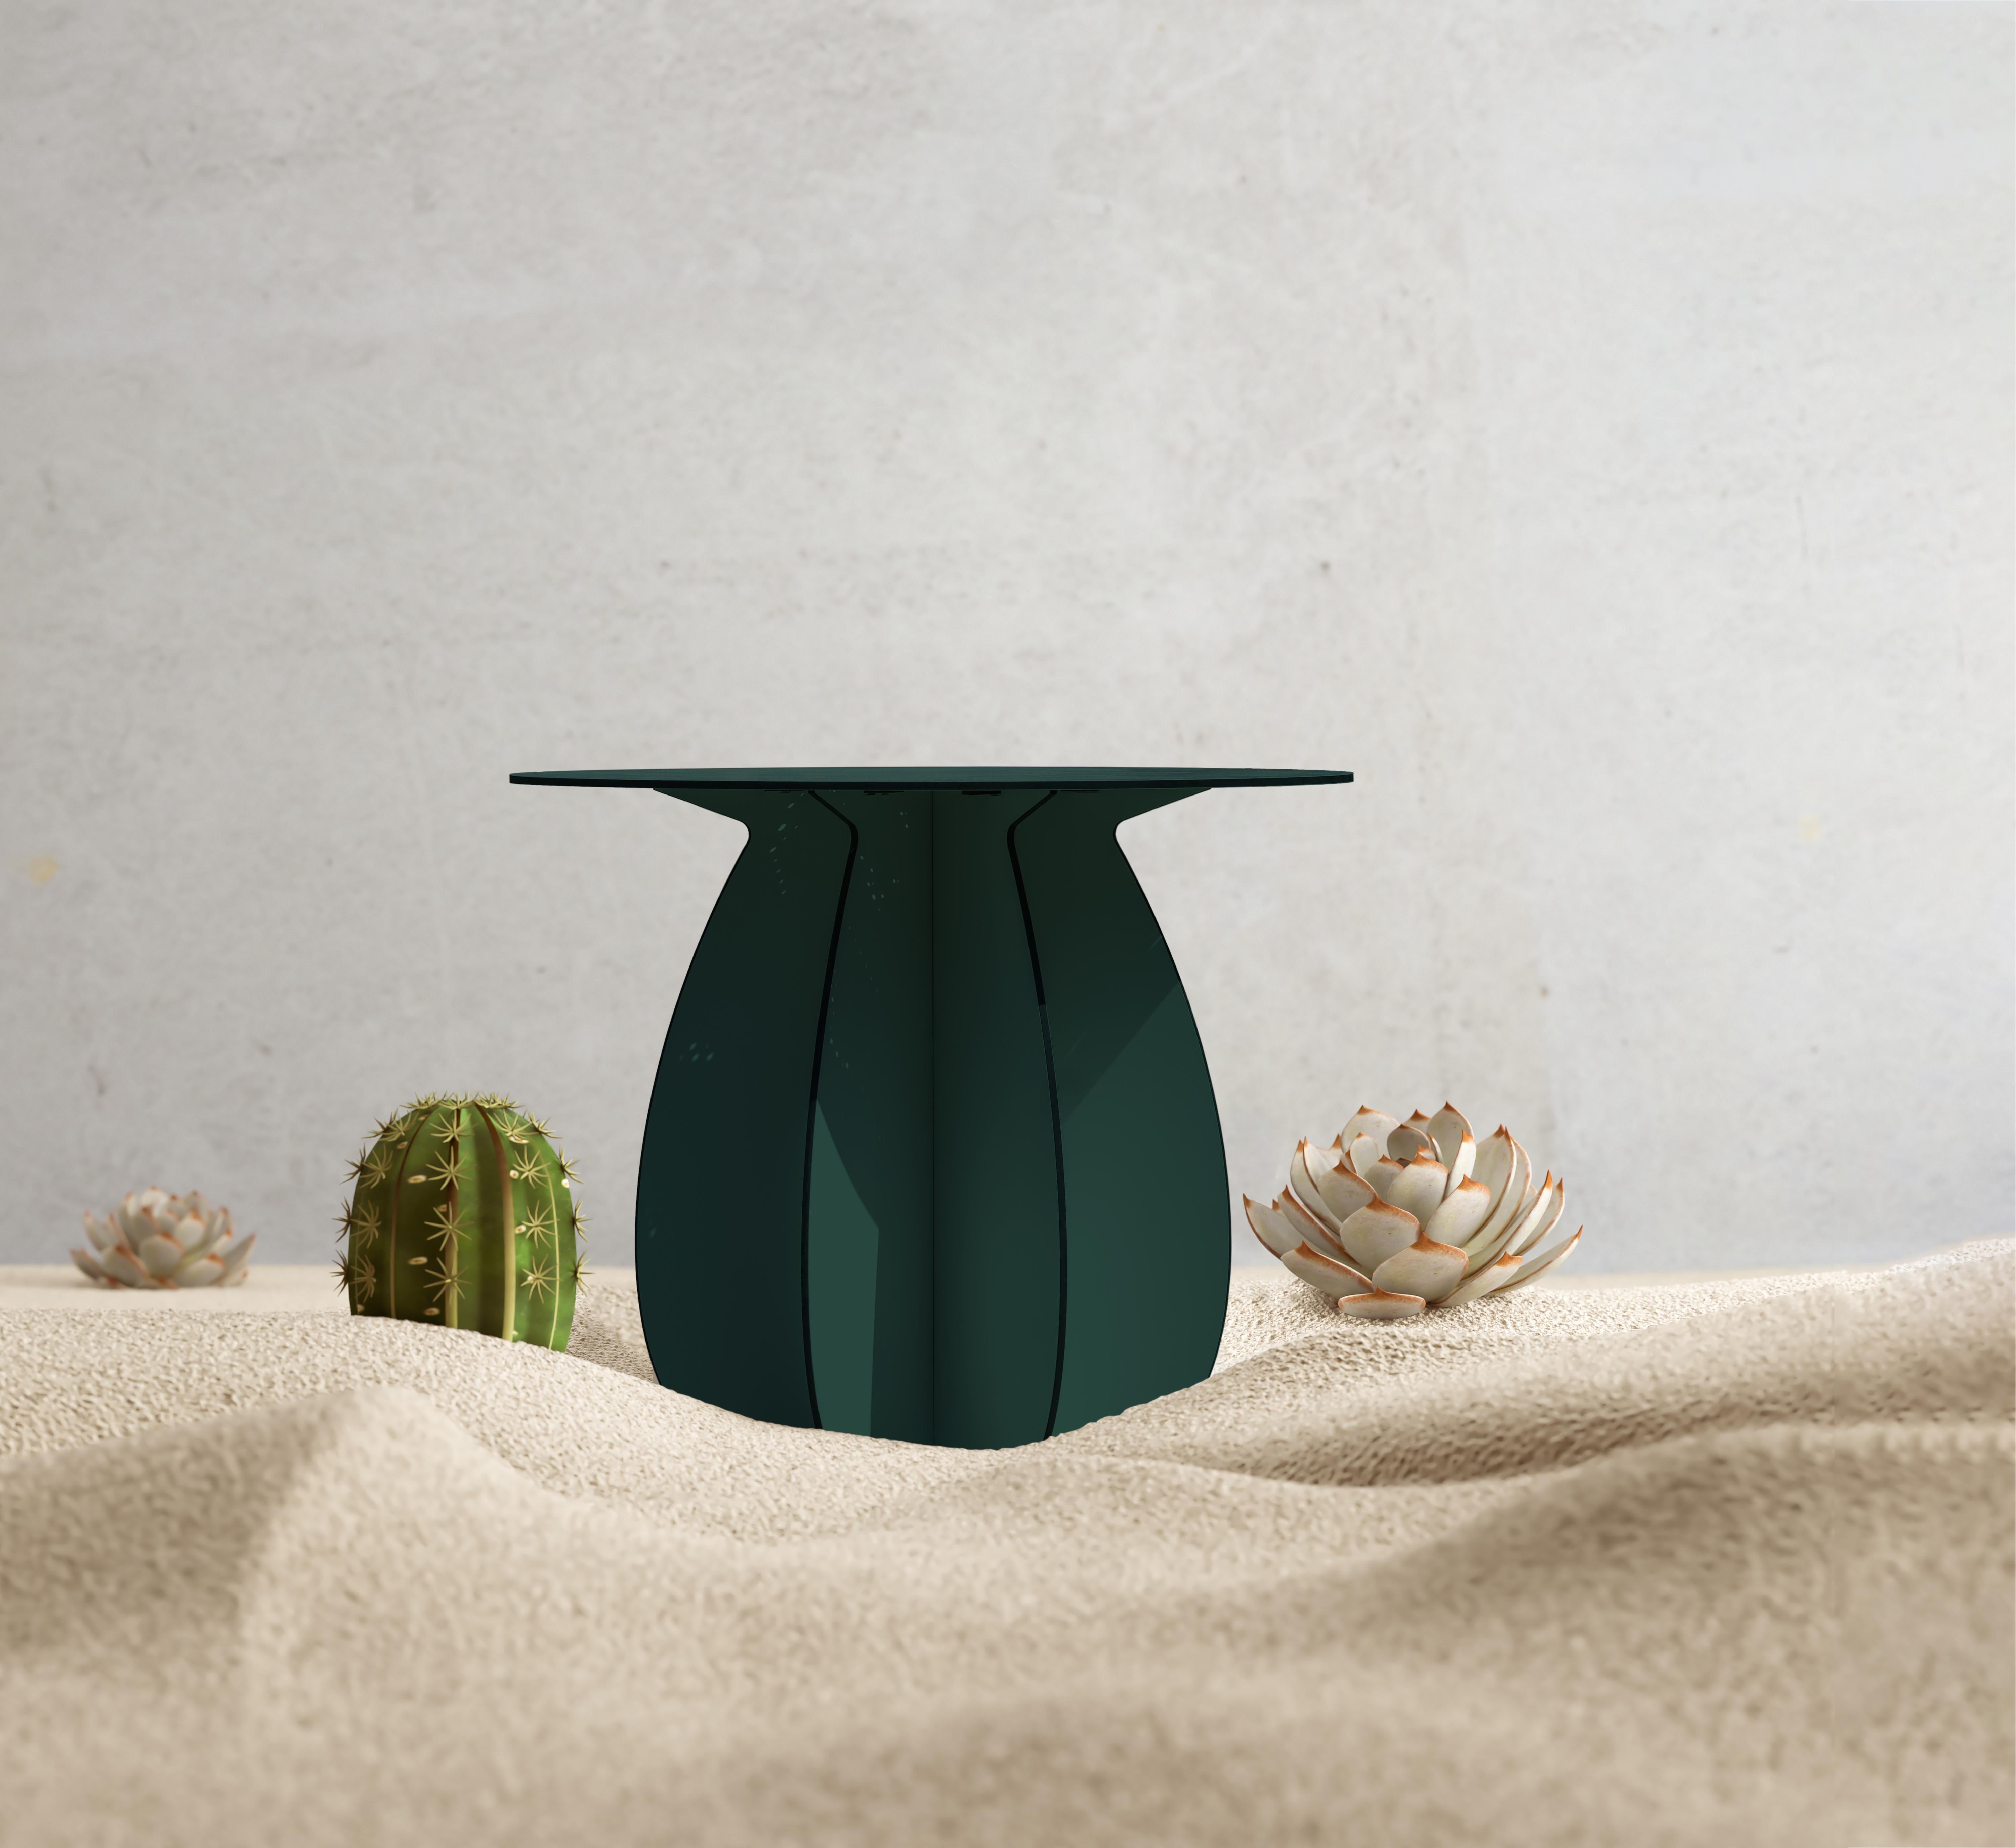 Ibride has partnered with designer Florence Bourel to create Gardenia, a trio of coffee tables whose legs are inspired by the world of cacti. Similar to the plants that inspired them, these tables are equally suited for a balcony or a living